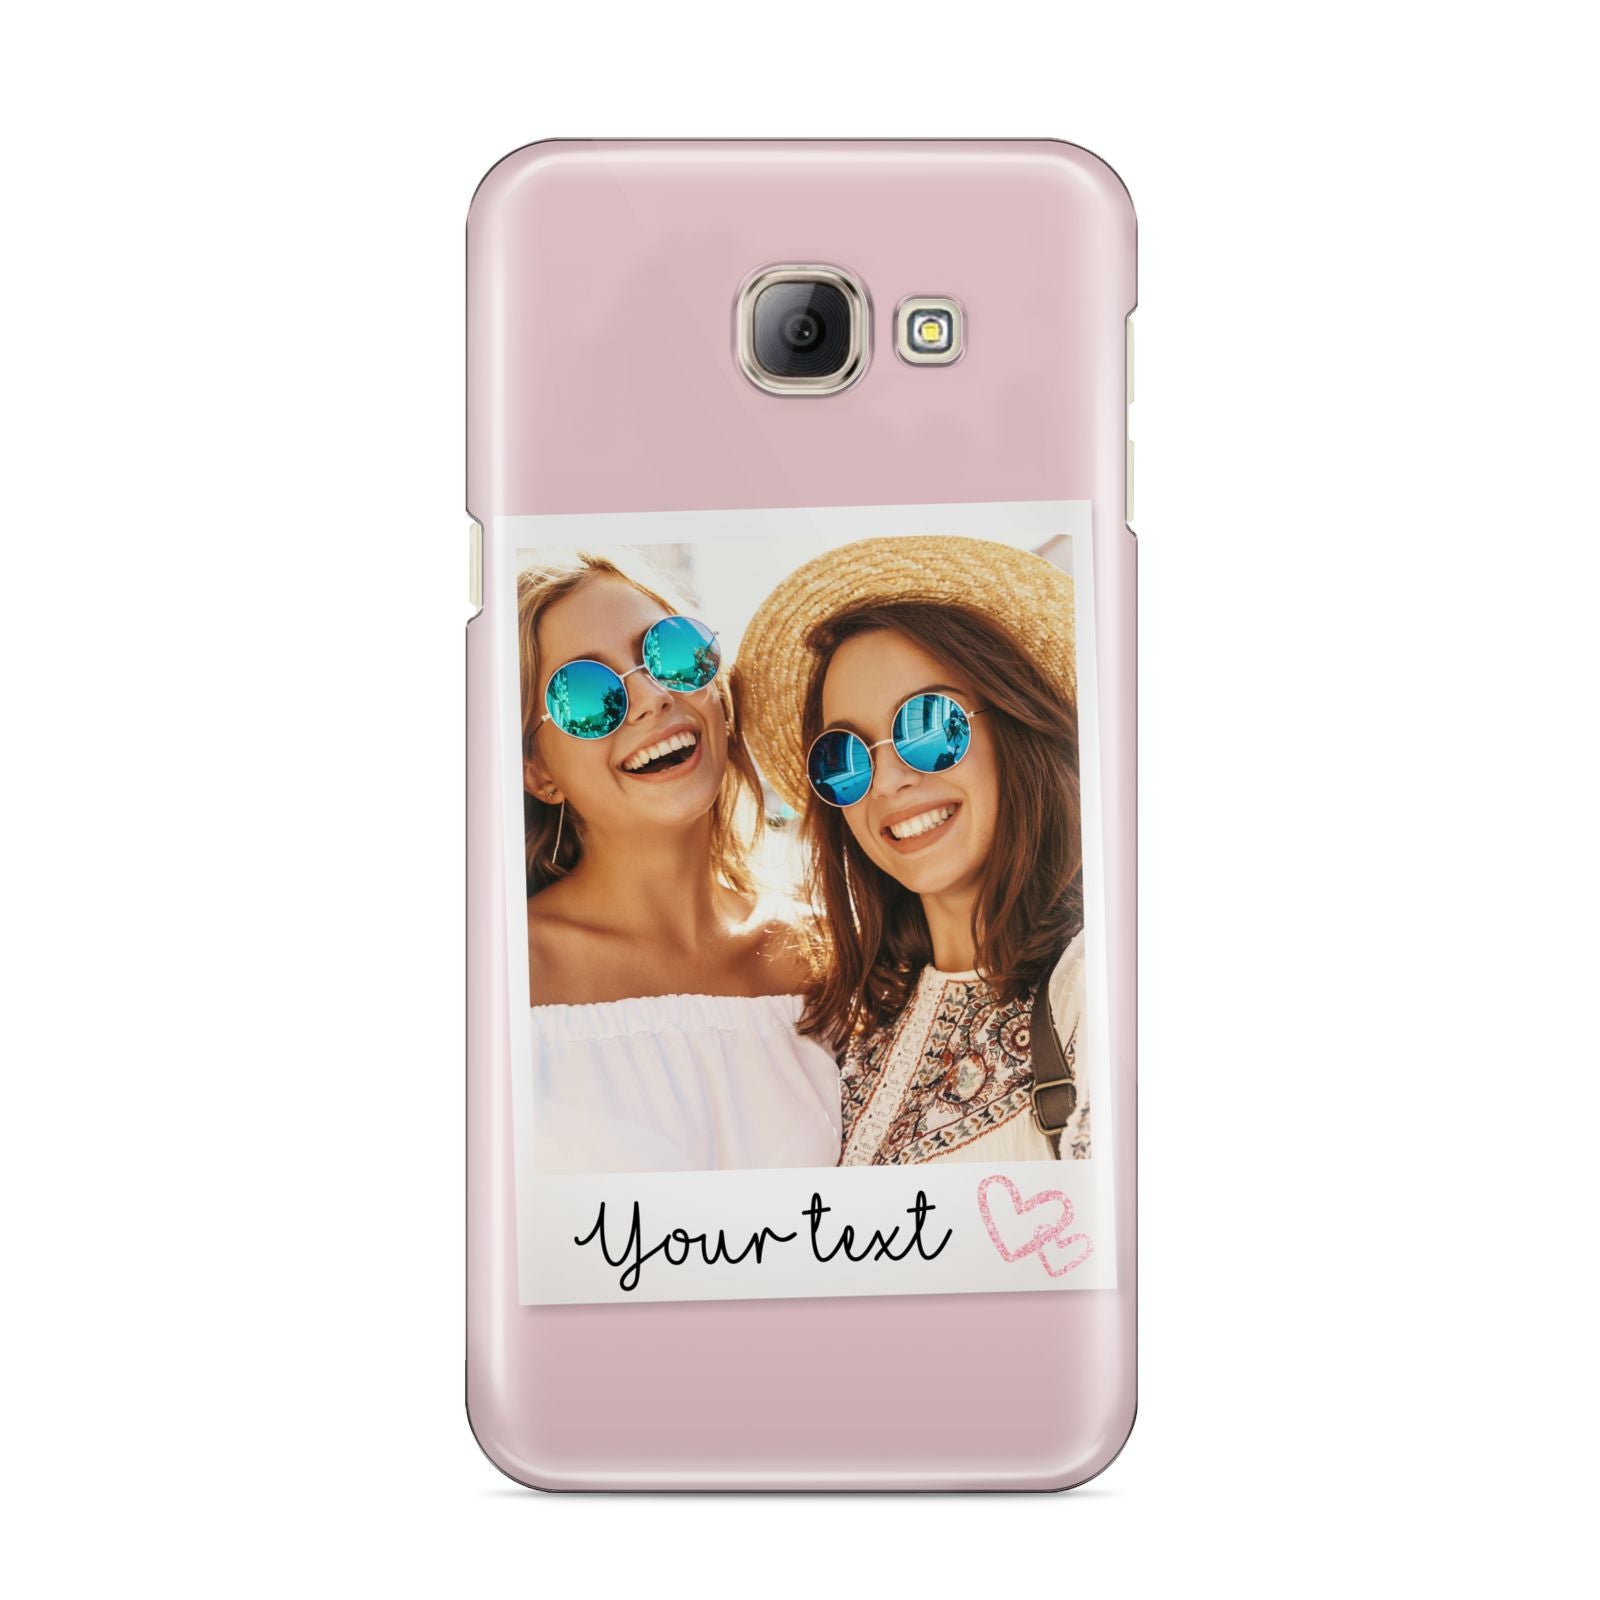 Personalised Best Friend Photo Samsung Galaxy A8 2016 Case